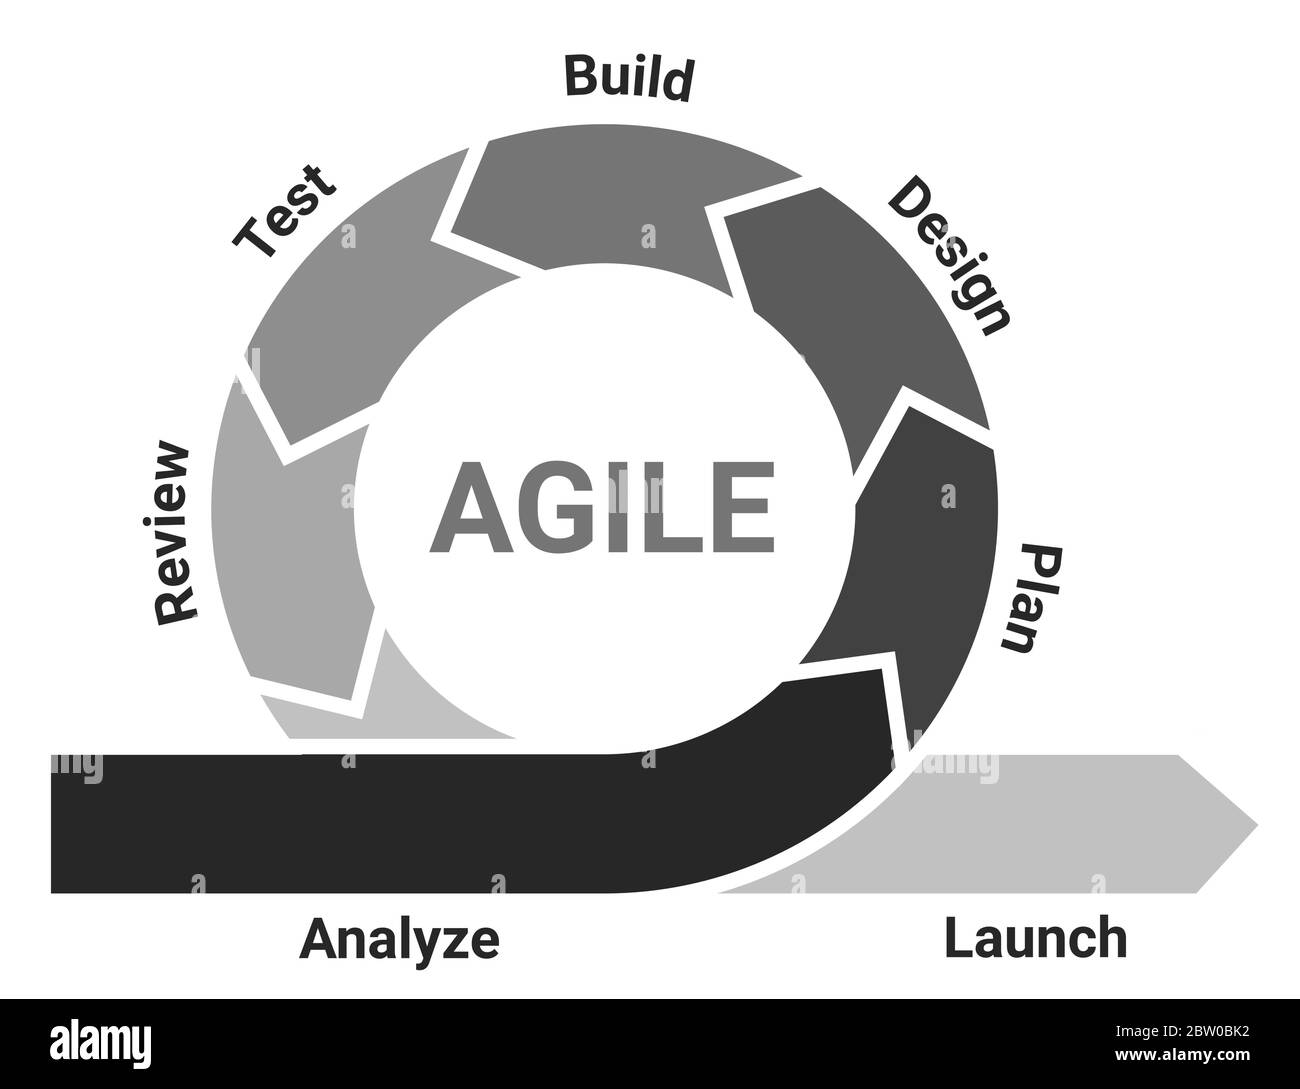 Agile methodology life cycle diagram scheme infographics with analysis, planning, design, development, testing, review and launch in greyscale. Stock Vector